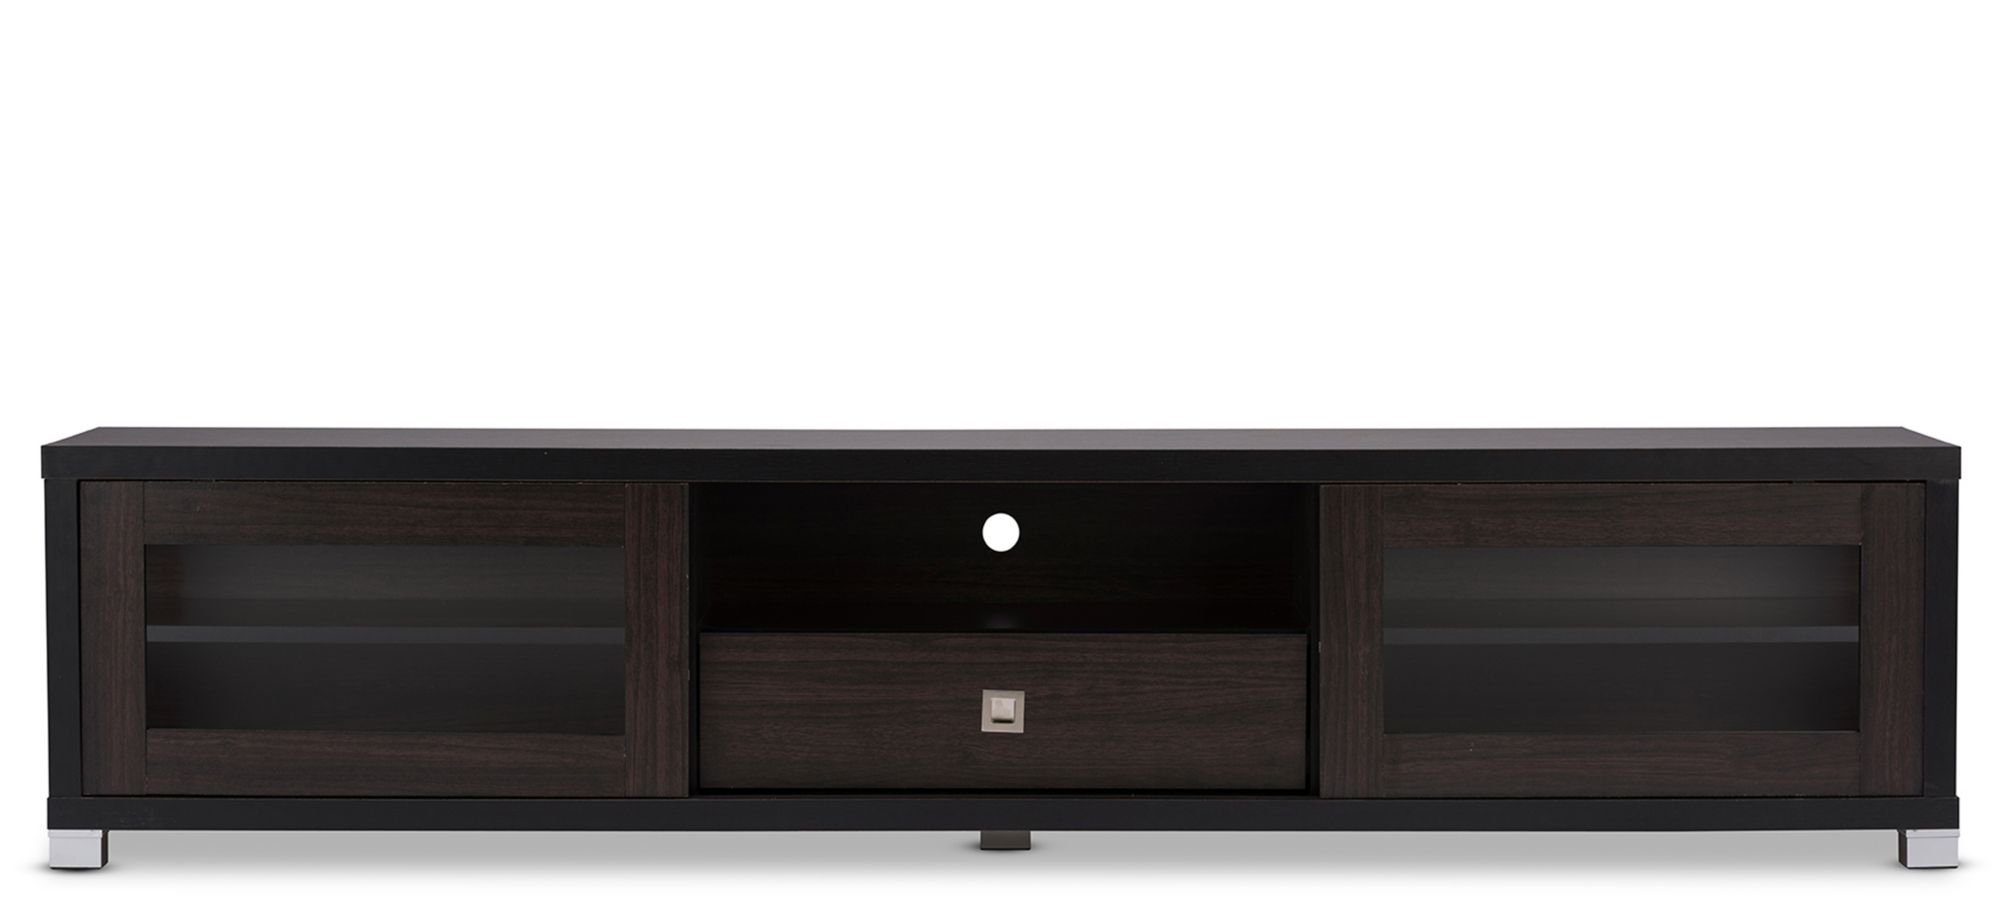 Beasley 70-Inch TV Cabinet with 2 Sliding Doors and Drawer in Dark Brown by Wholesale Interiors